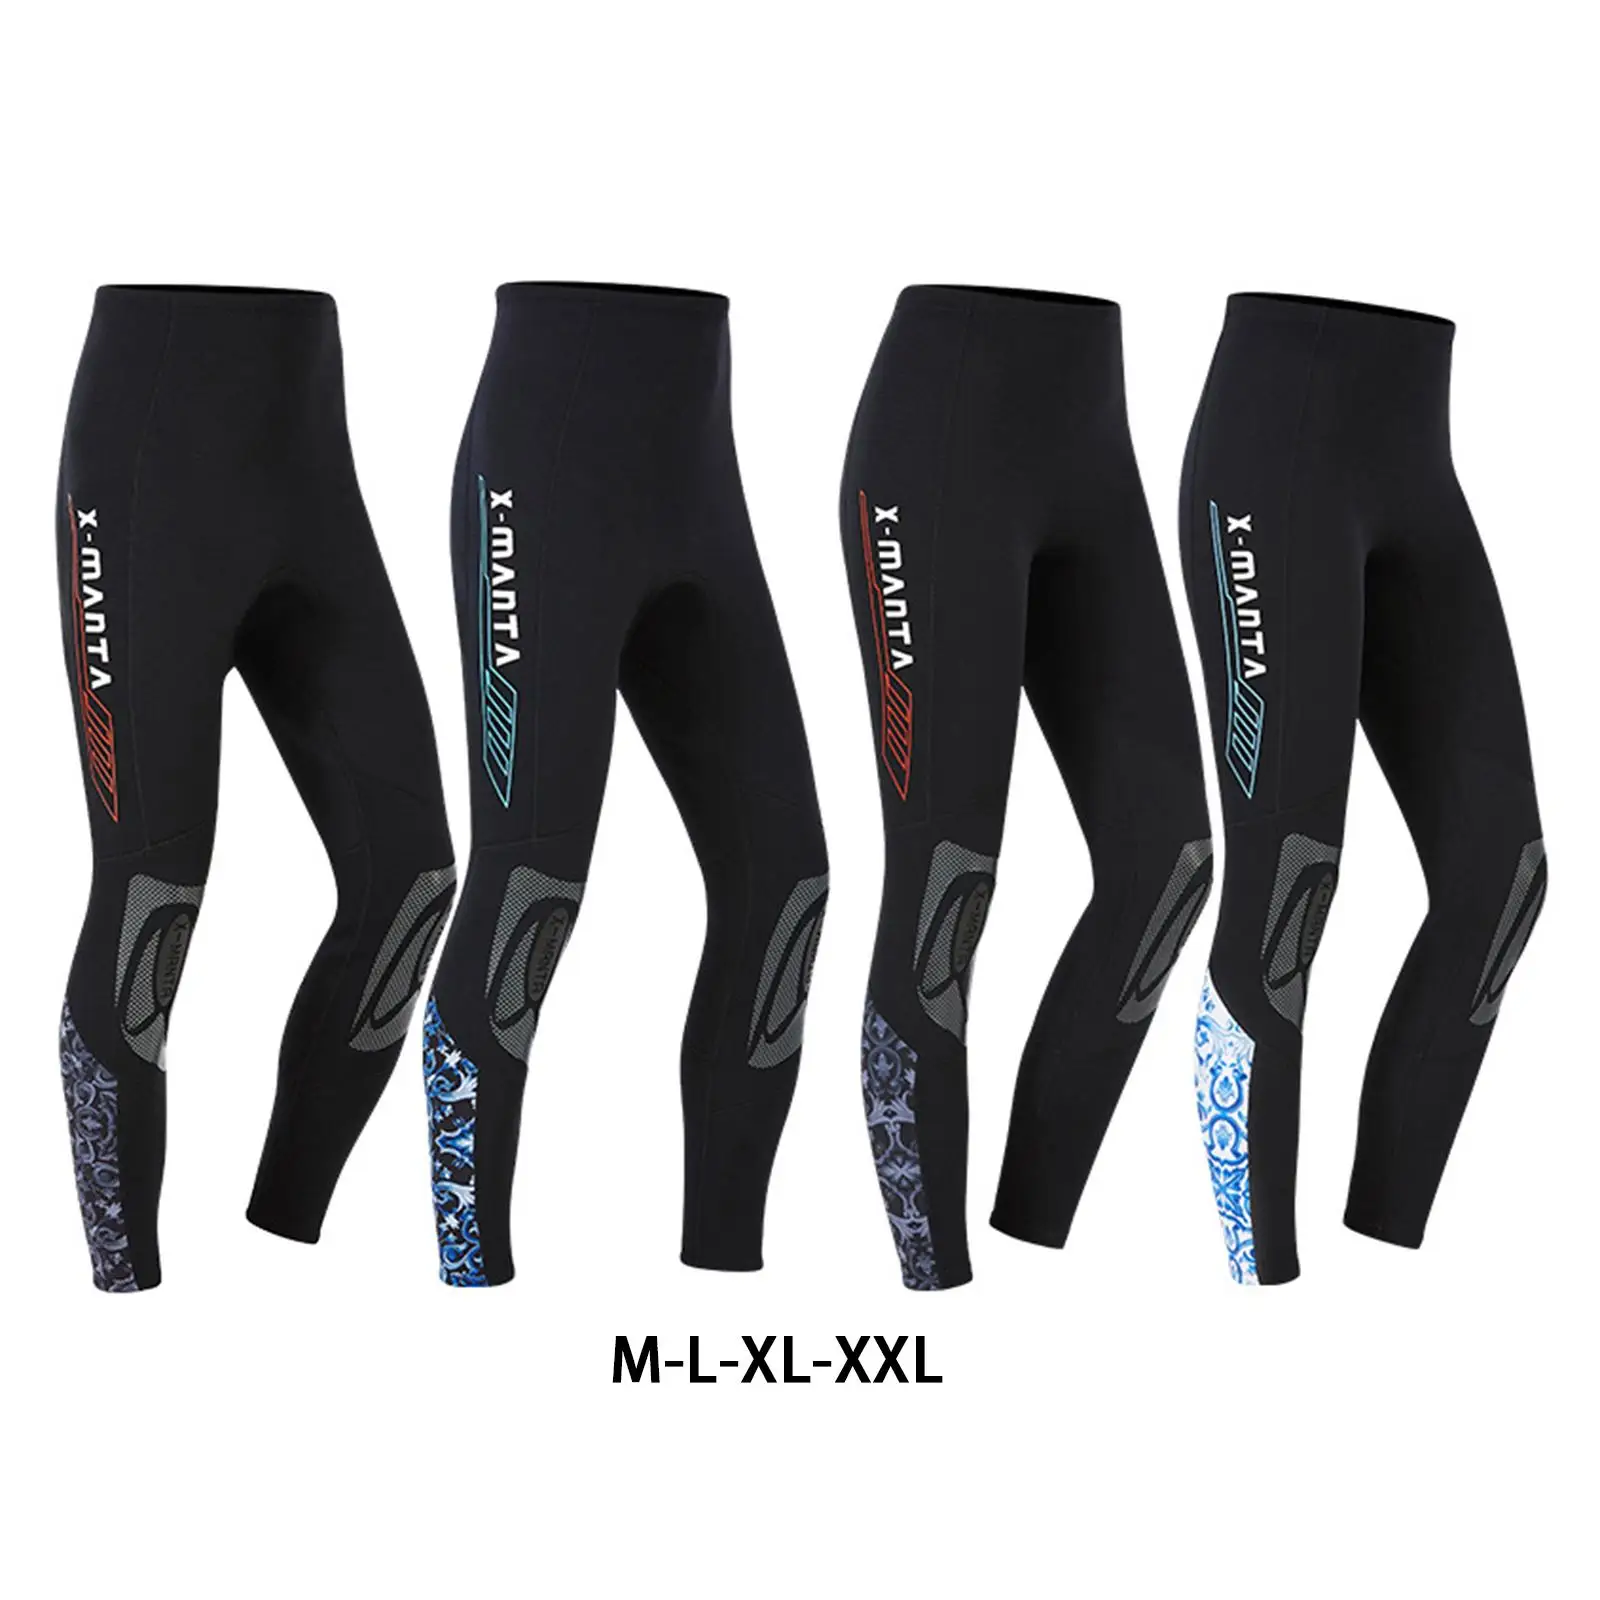 3mm Black Wetsuit Pants for Men And Women, Diving, Snorkeling, Surfing,